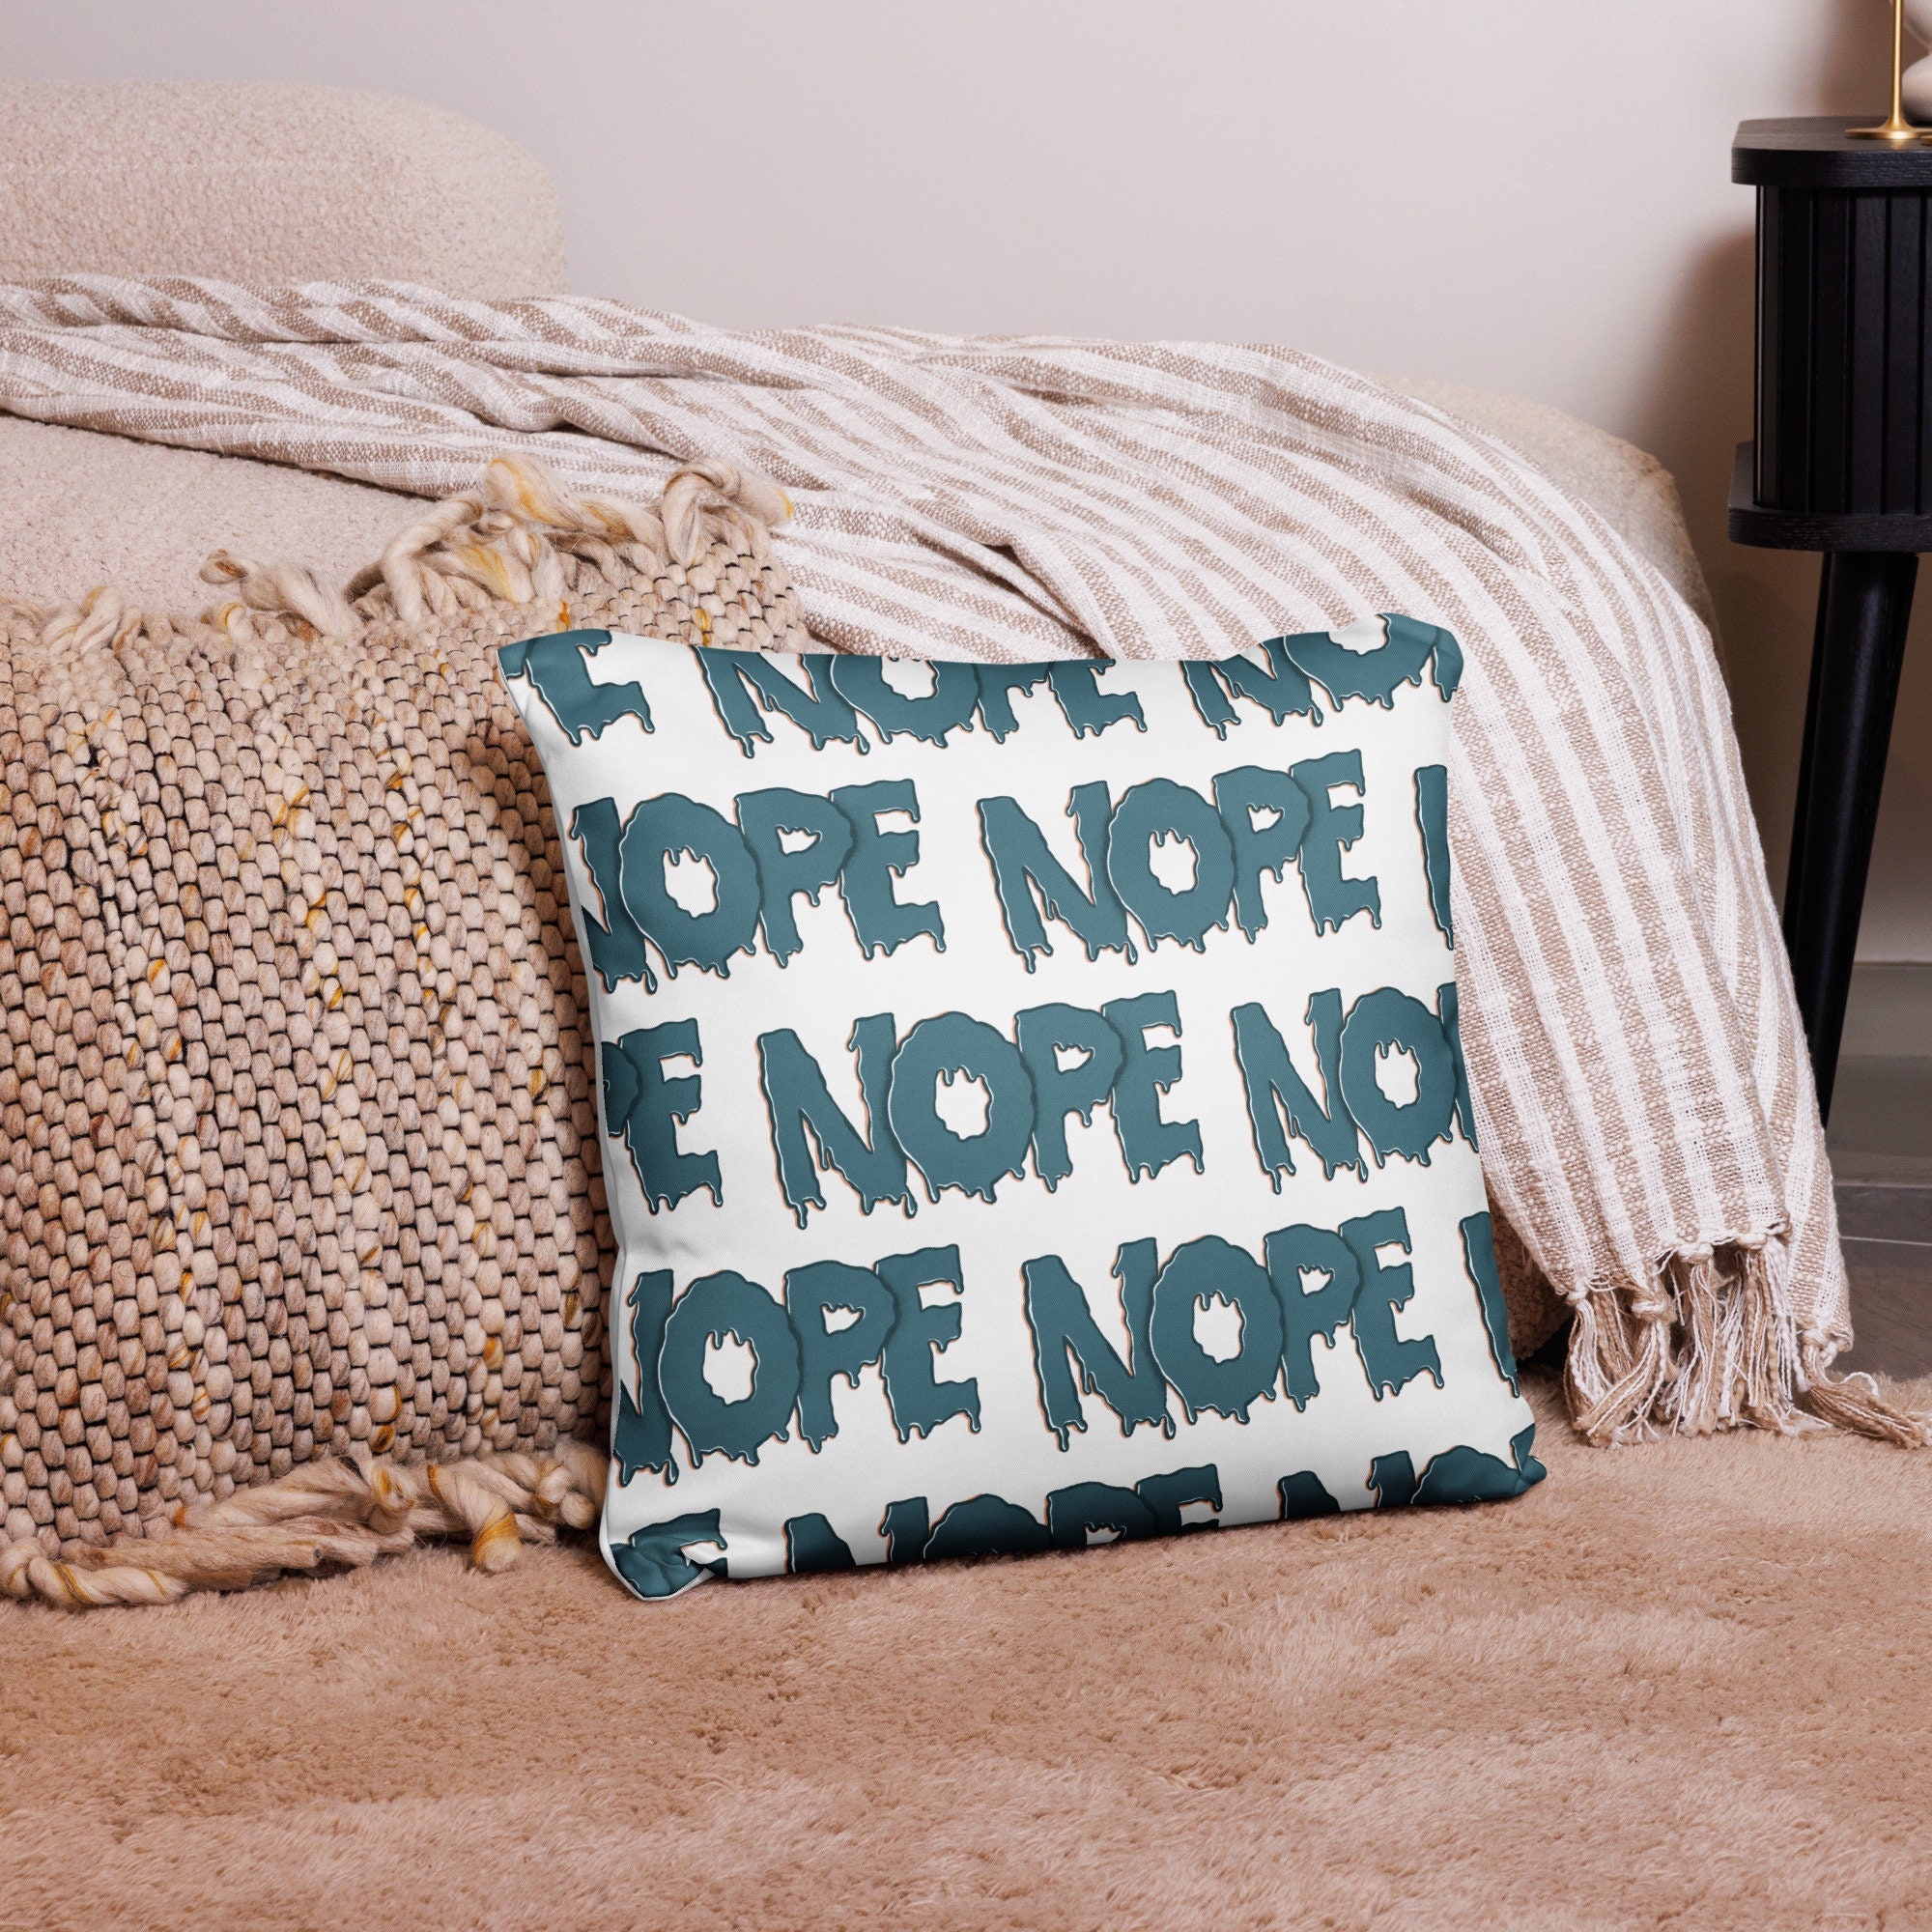 Nope - Funny Throw Pillow – Bitchcraft Gifts